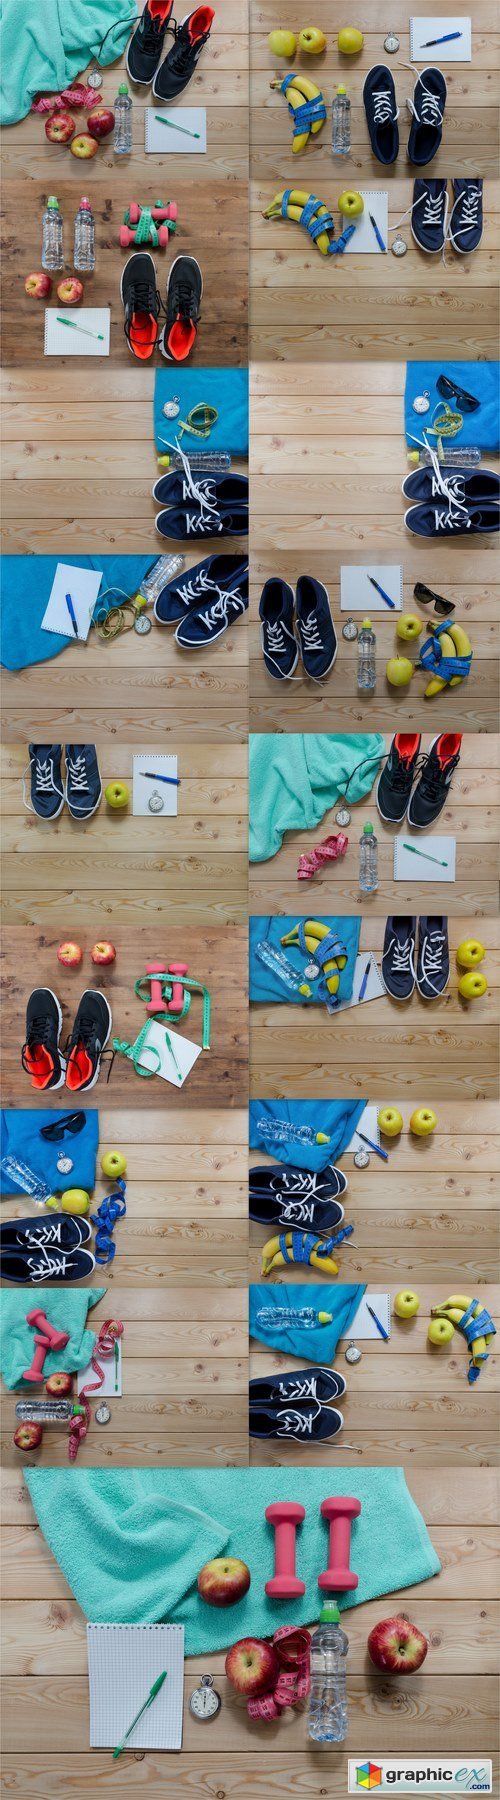 Fitness concept with sneakers